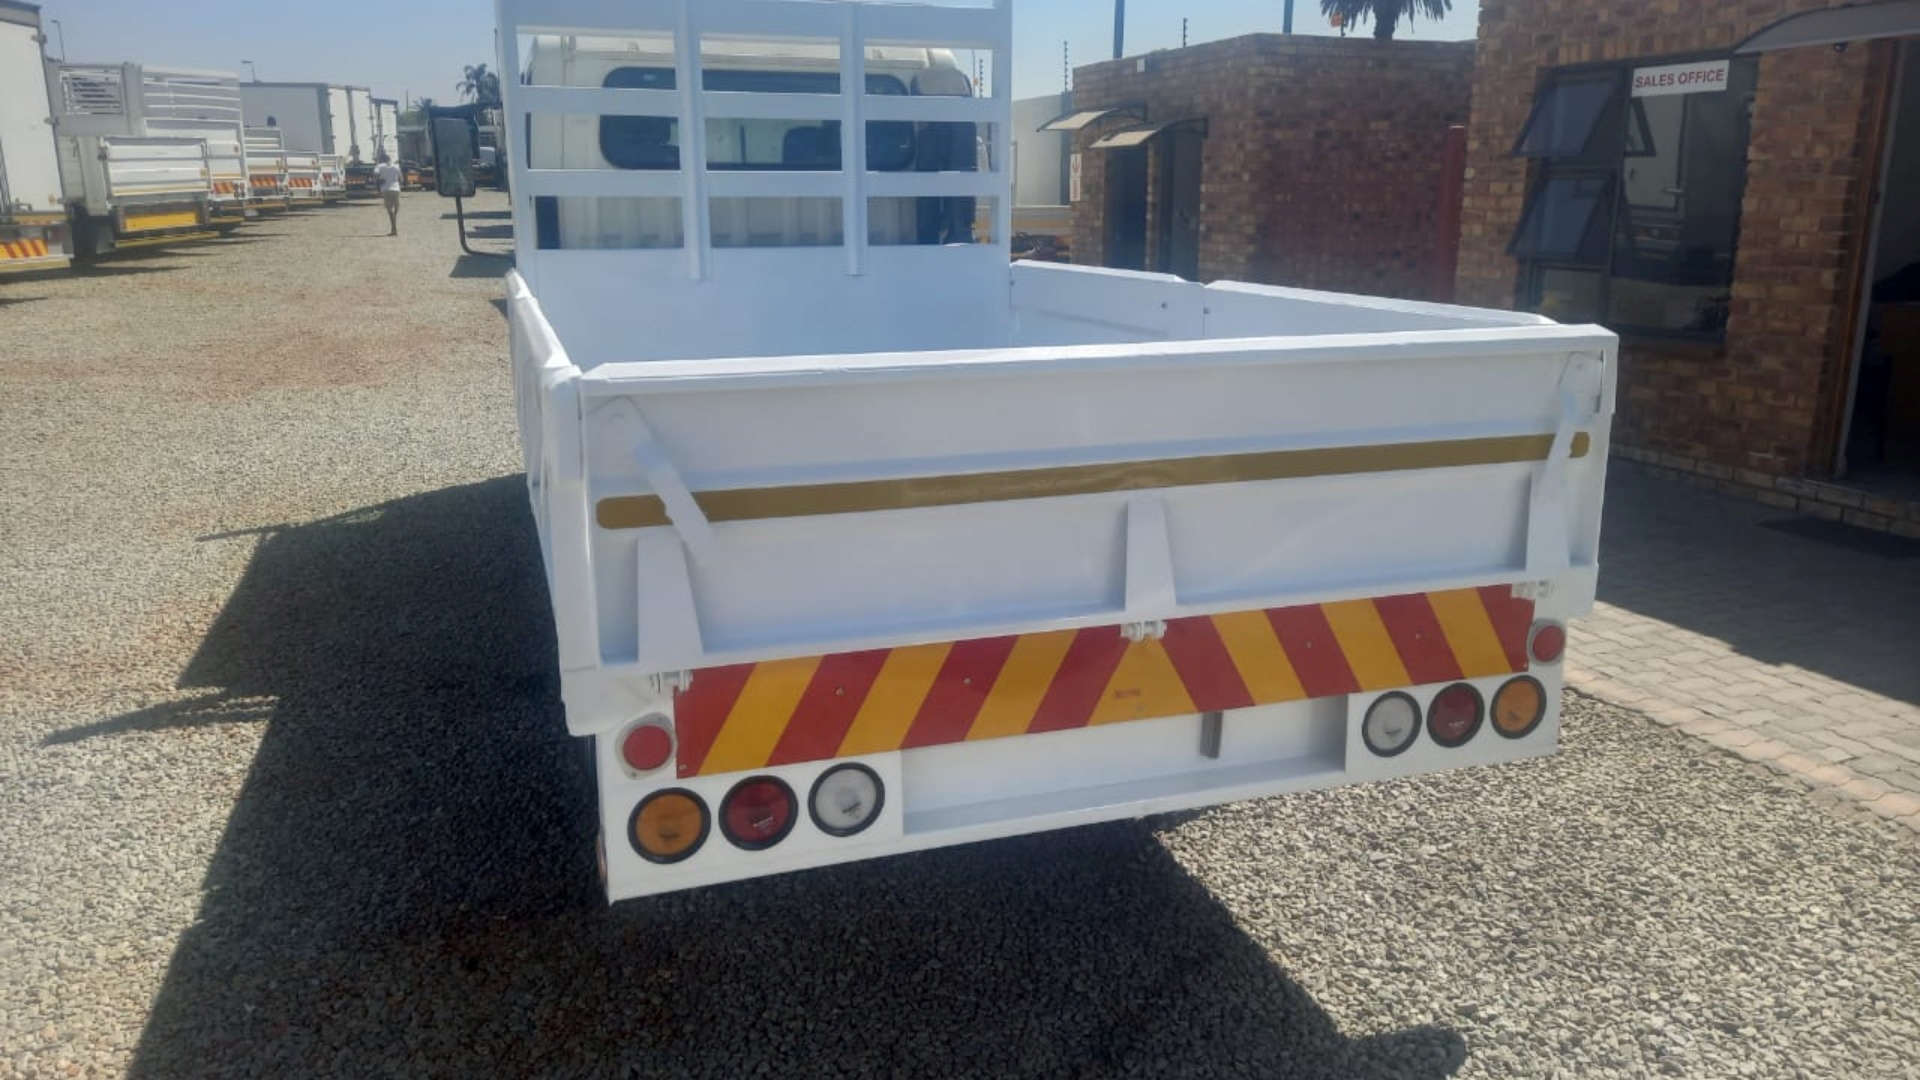 Isuzu Dropside trucks NMR250 CREW CAB 2.5TON 2013 for sale by A to Z TRUCK SALES | Truck & Trailer Marketplace